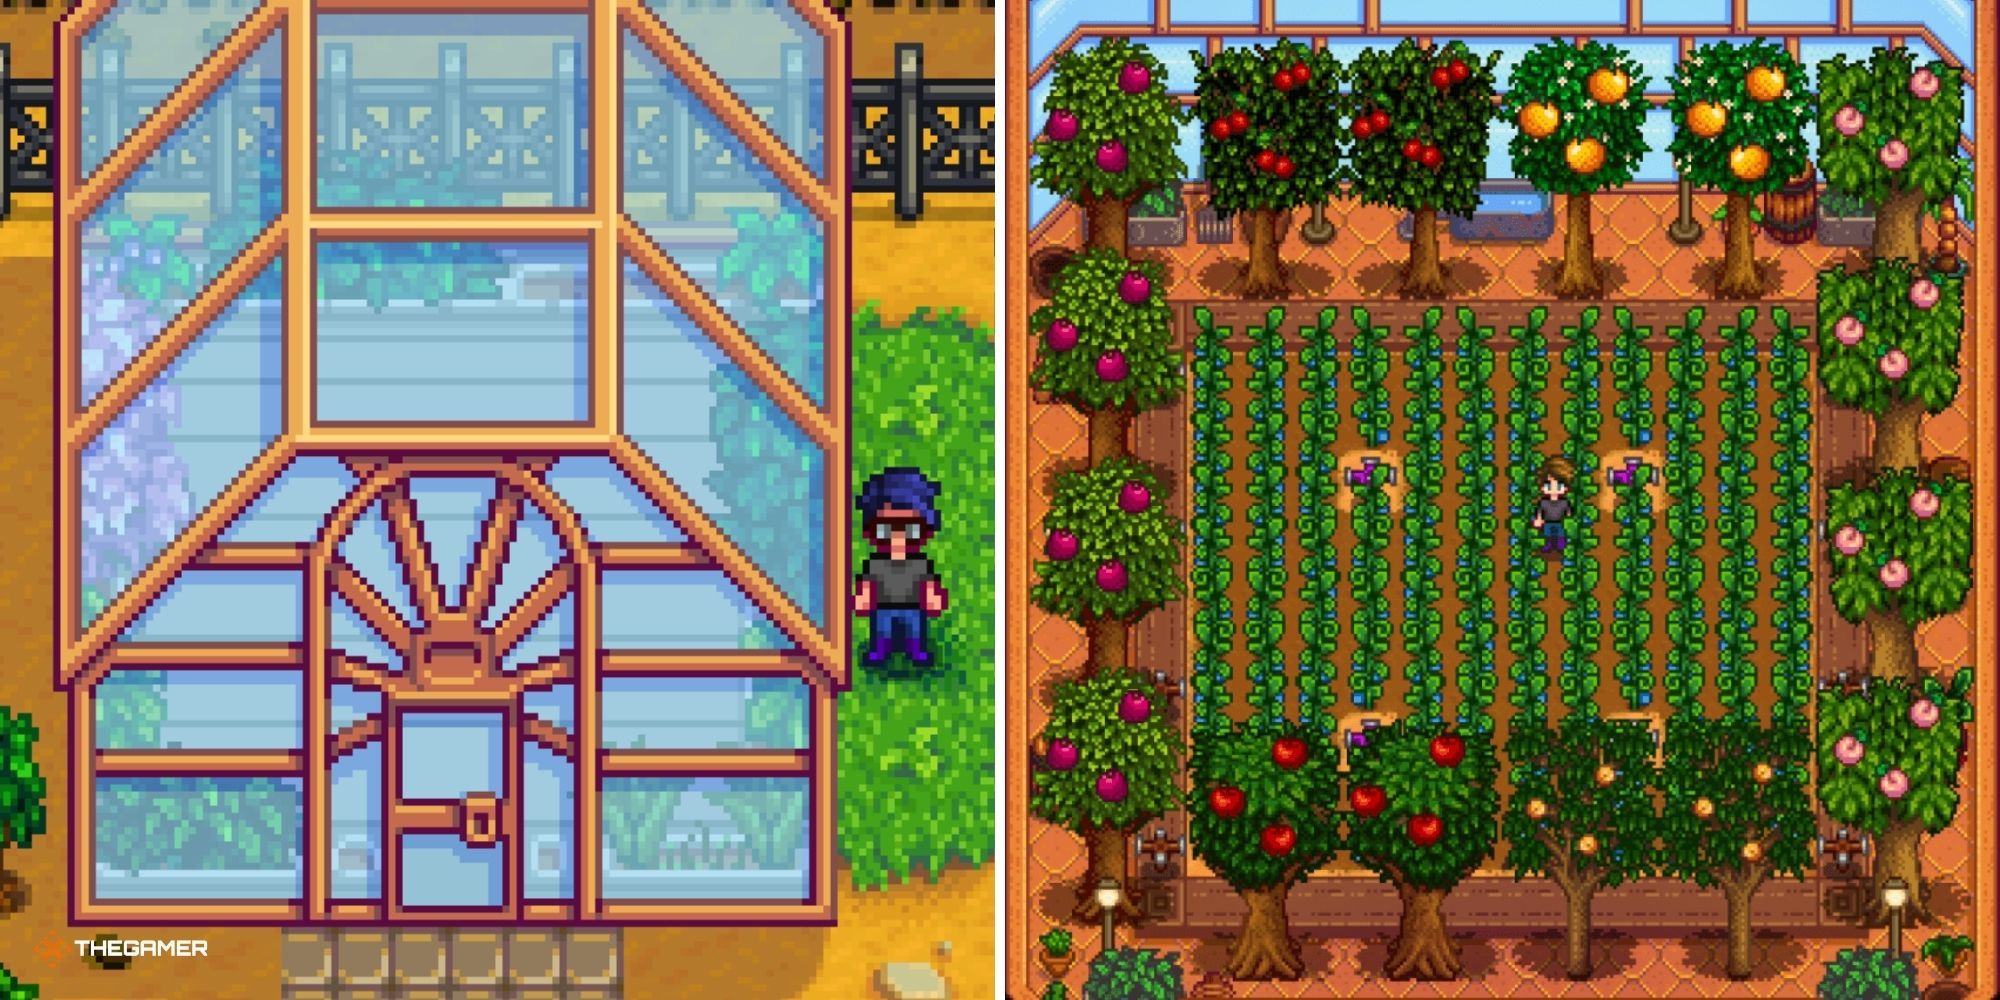 Split image of Stardew Valley - player outside the Greenhouse on the left, player inside a full greenhouse on the right